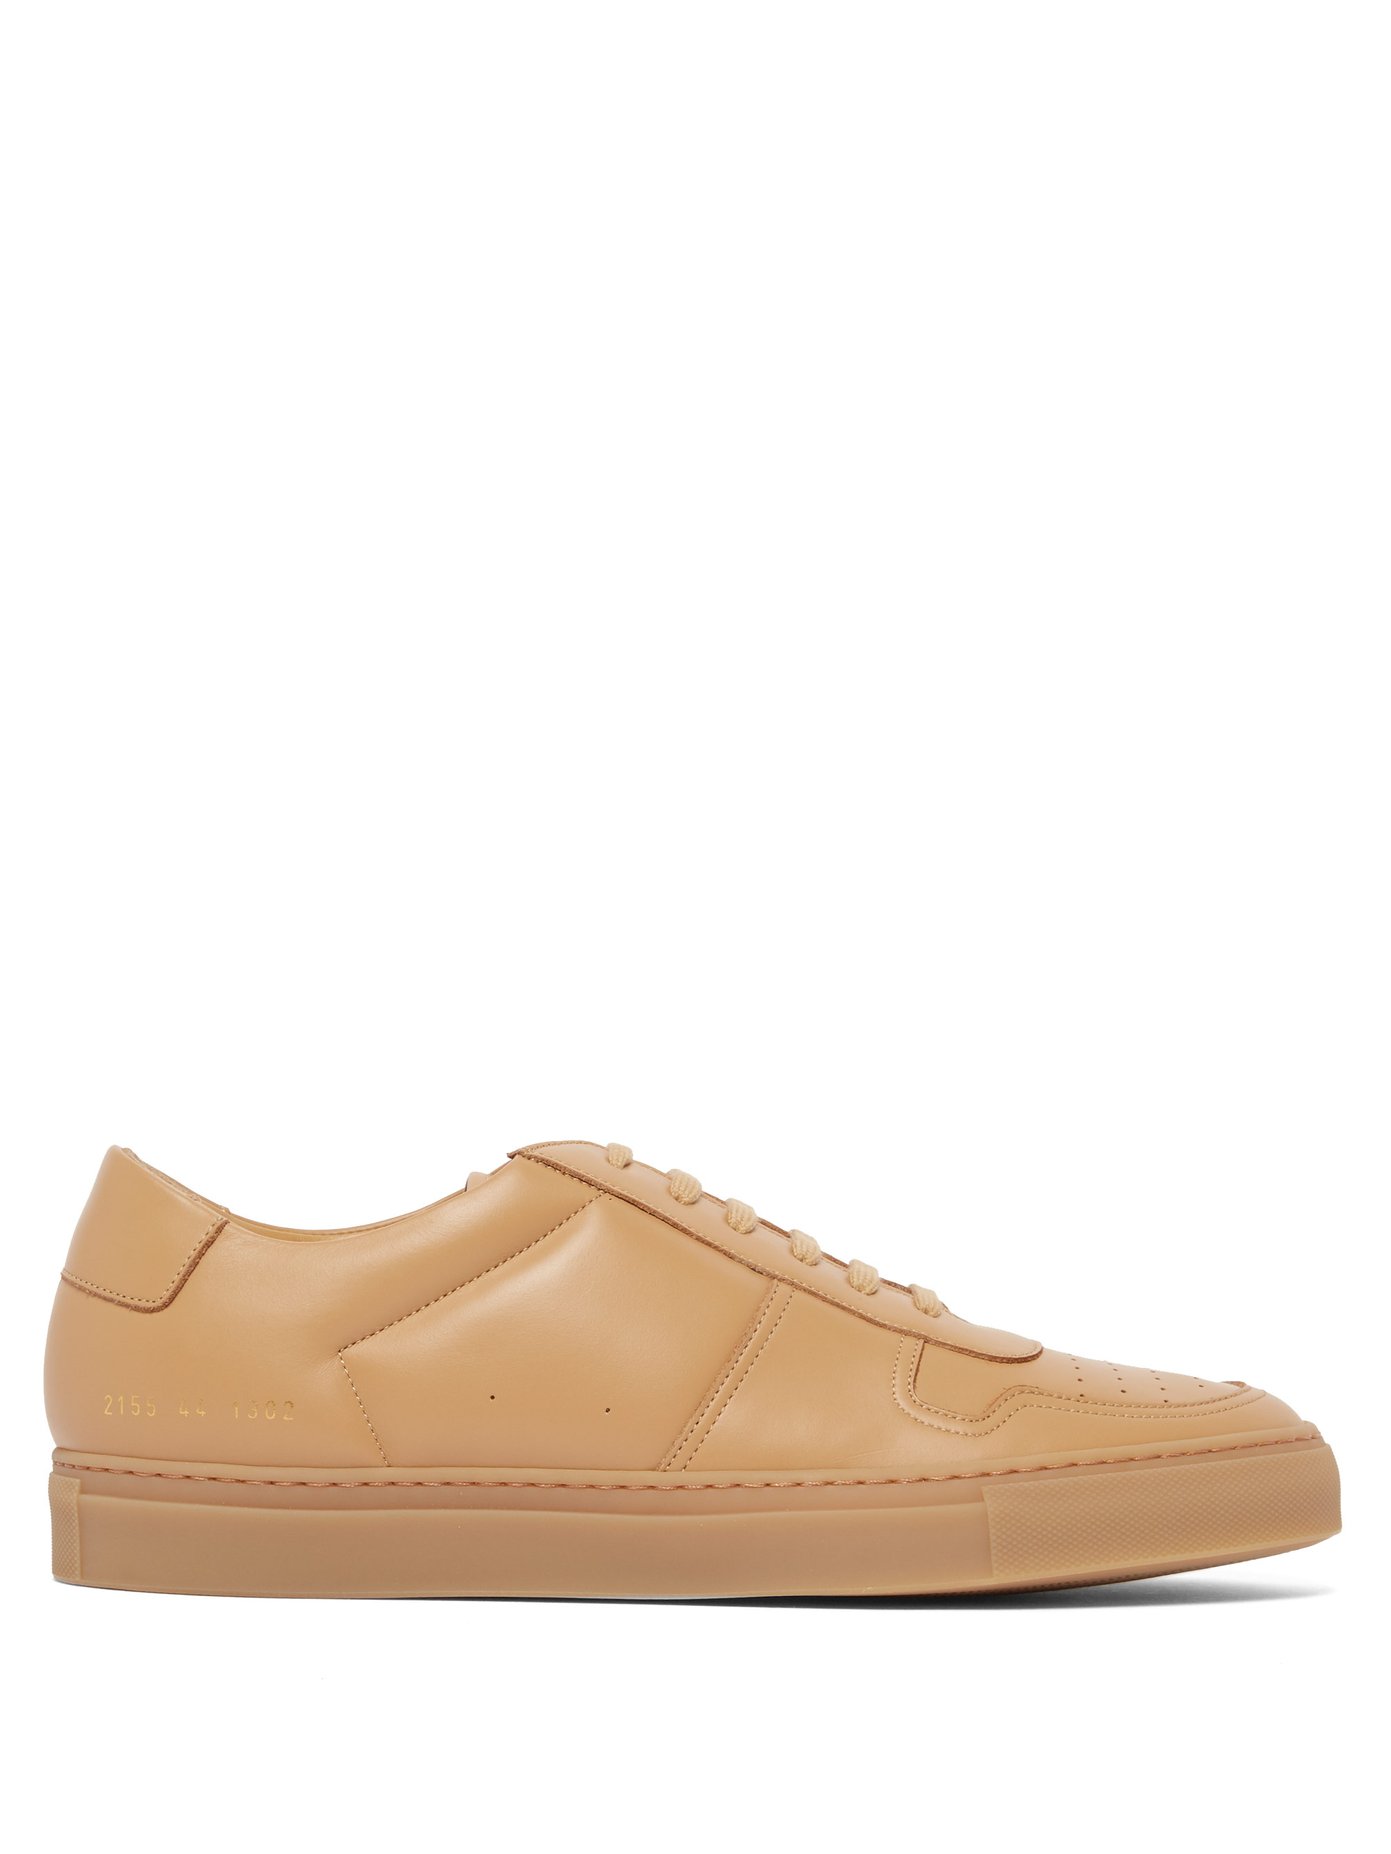 common projects trainers uk